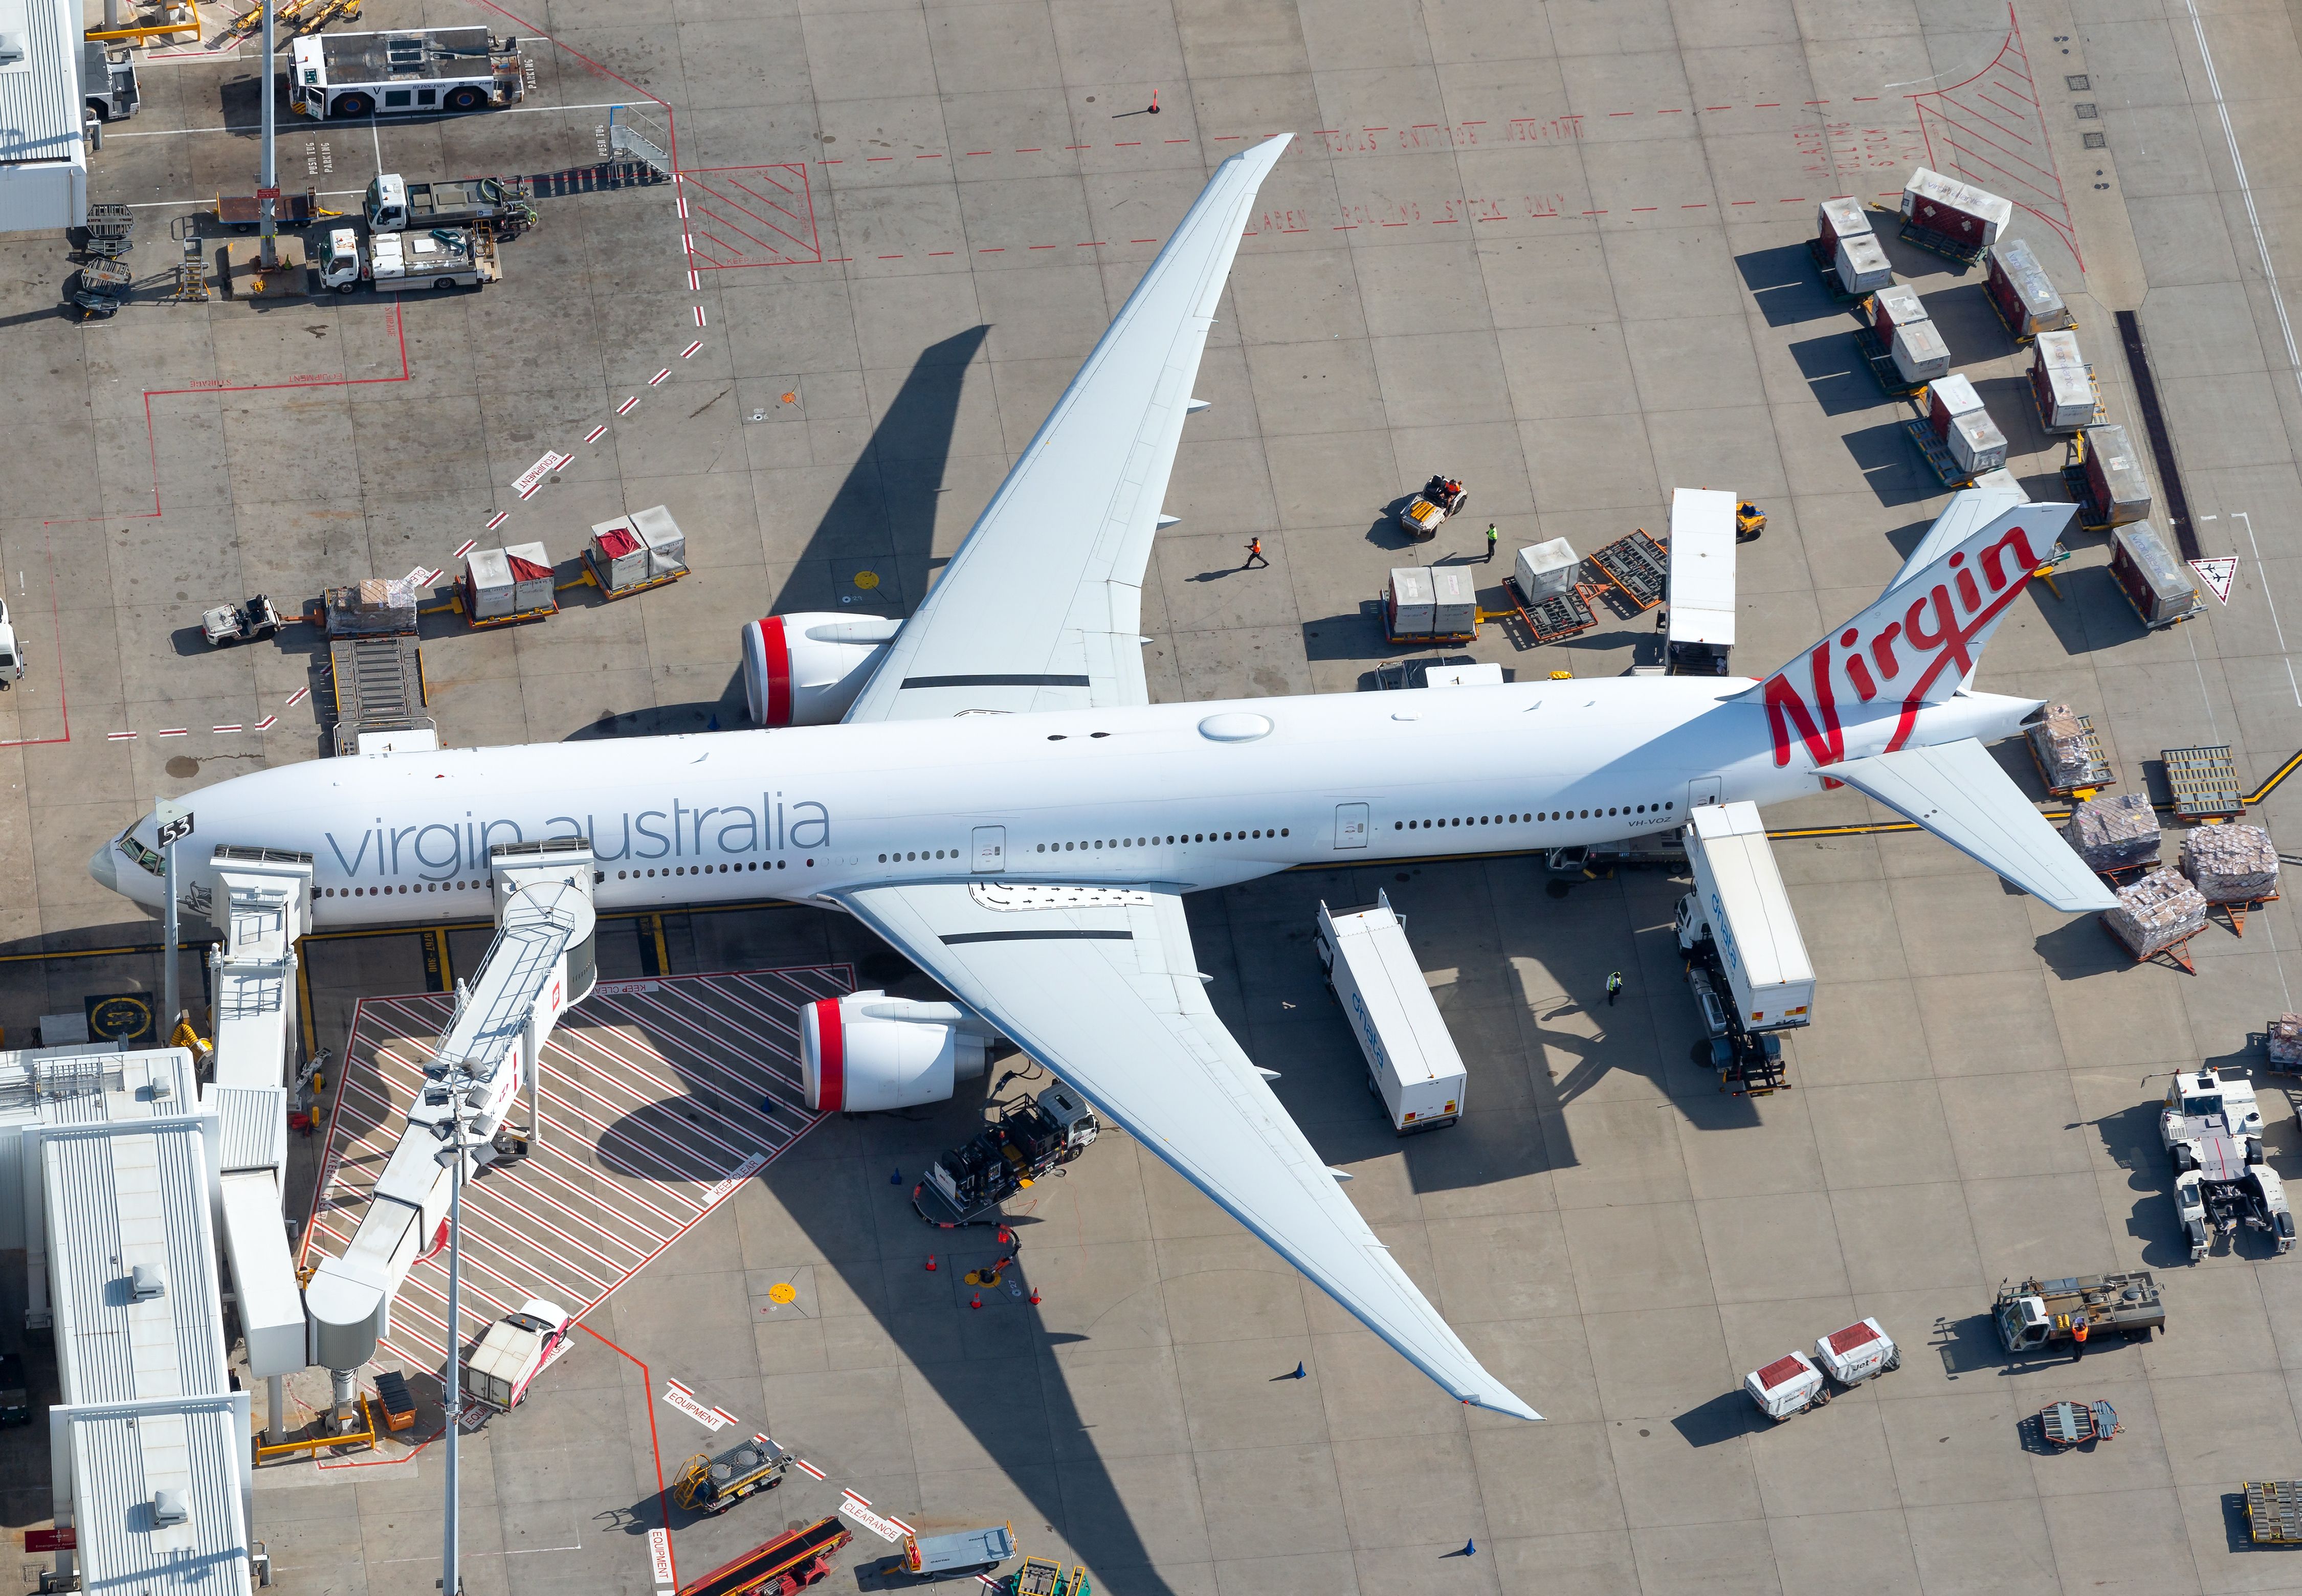 March 25 2018: Virgin Australia Boeing 777 aerial view at Sydney International Airport. Aircraft registered as VH-VOZ. Australian airline in debt entering voluntary administration